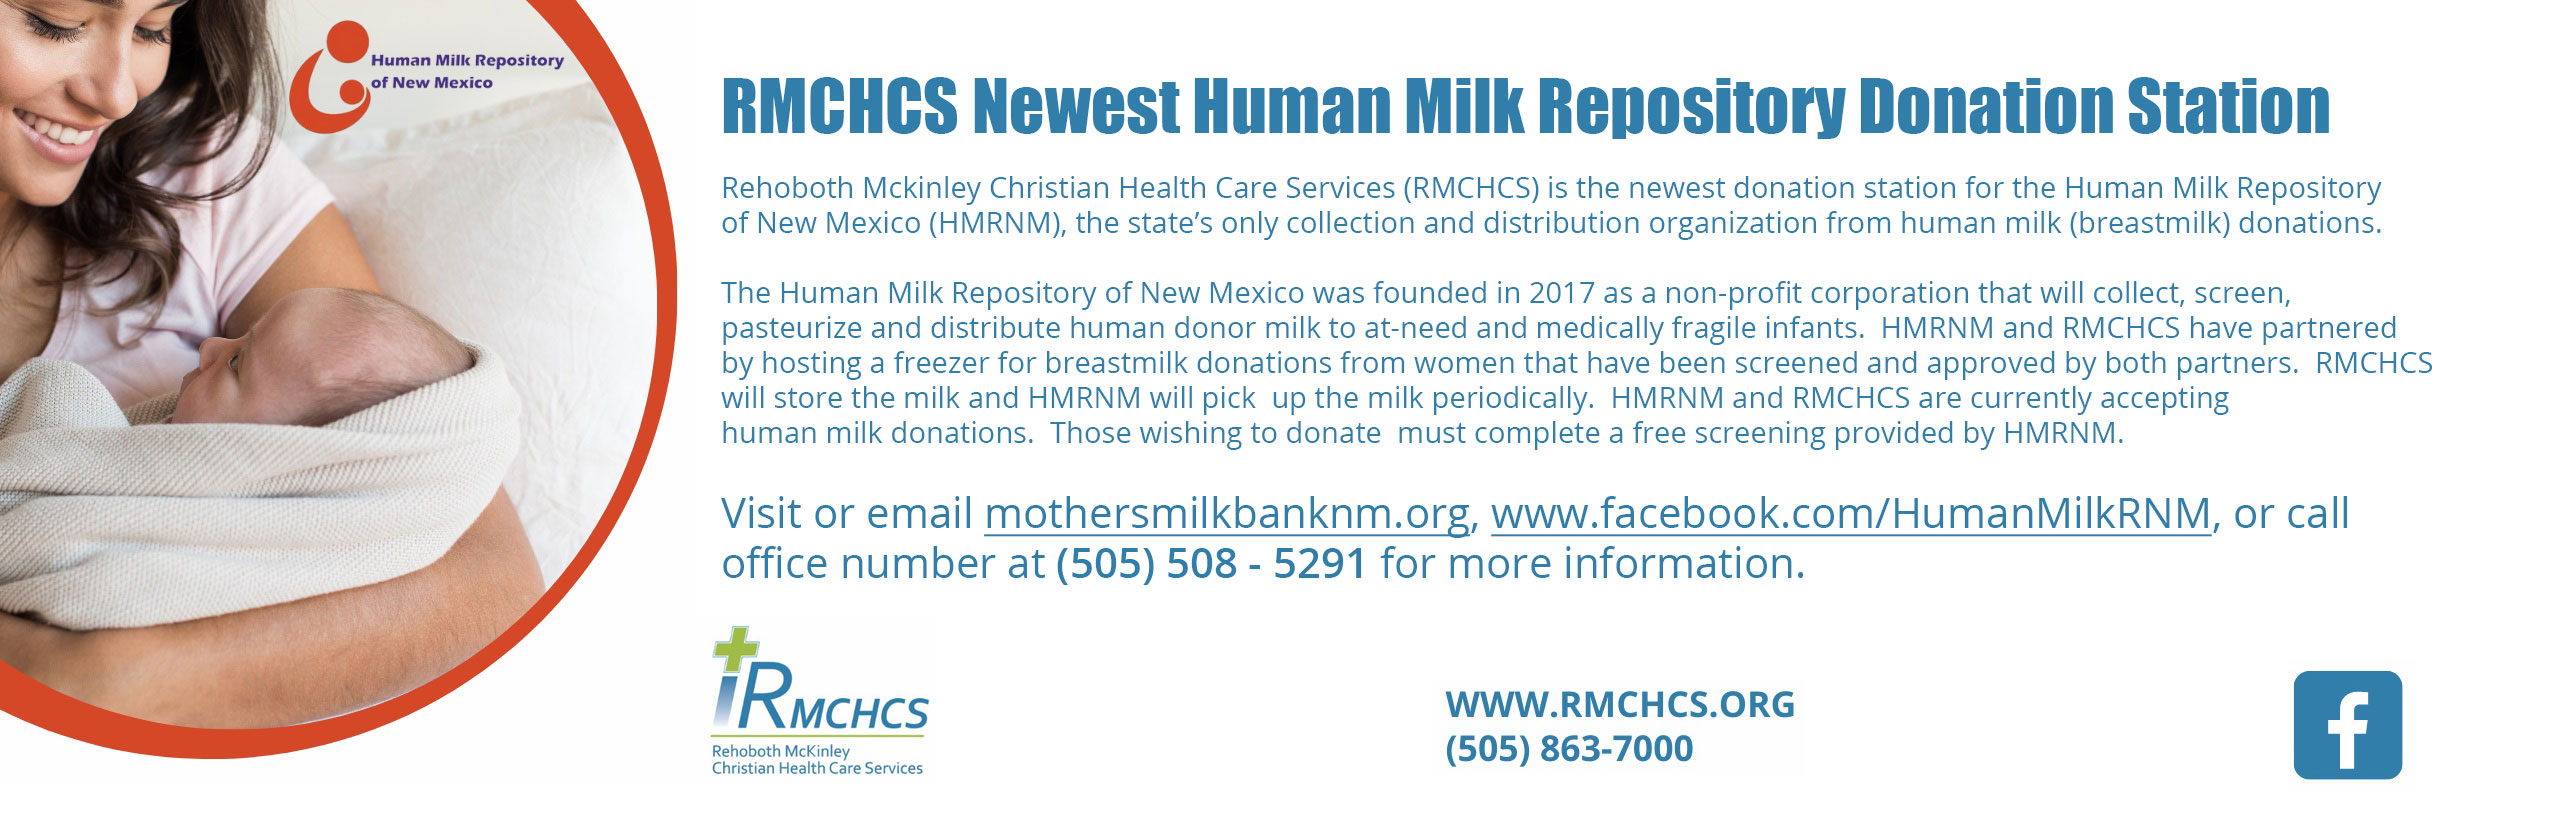 Human Milk Repository of New Mexico

RMCHCS Newest Human Milk Repository Donation Station

Rehoboth Mckinley Christian Health Care Services (RMCHCS) is the newest donation station for the Human Milk Repository of New Mexico (HMRNM), the state's only collection and distribution organization from human milk (breastmilk) donations.

The Human Milk Repository of New Mexico was founded in 2017 as a non-profit corporation that will collect, screen, pasteurize and distribute human donor milk to at-need and medically fragile infants. HMRNM and RMCHCS have partnered by hosting a freezer for breastmilk donations from women that have been screened and approved by both partners.RMCHC will store the milk and HMRNM will pick up the milk periodically. HMRNM and RMCHCS are currently accepting human milk donations. Those wishing to donate must complete a free screening provided by HMRNM. 

Visit or e-mail mothersmilkbanknm.org, www.facebook.com/HumanMilkRNM, or call office number at (505) 508-5291 for more information.

RMCHCS
Rehoboth McKinley Chrisitan Health Care Services


www.rmchcs.org
(505) 863-7000

-facebook logo (f)